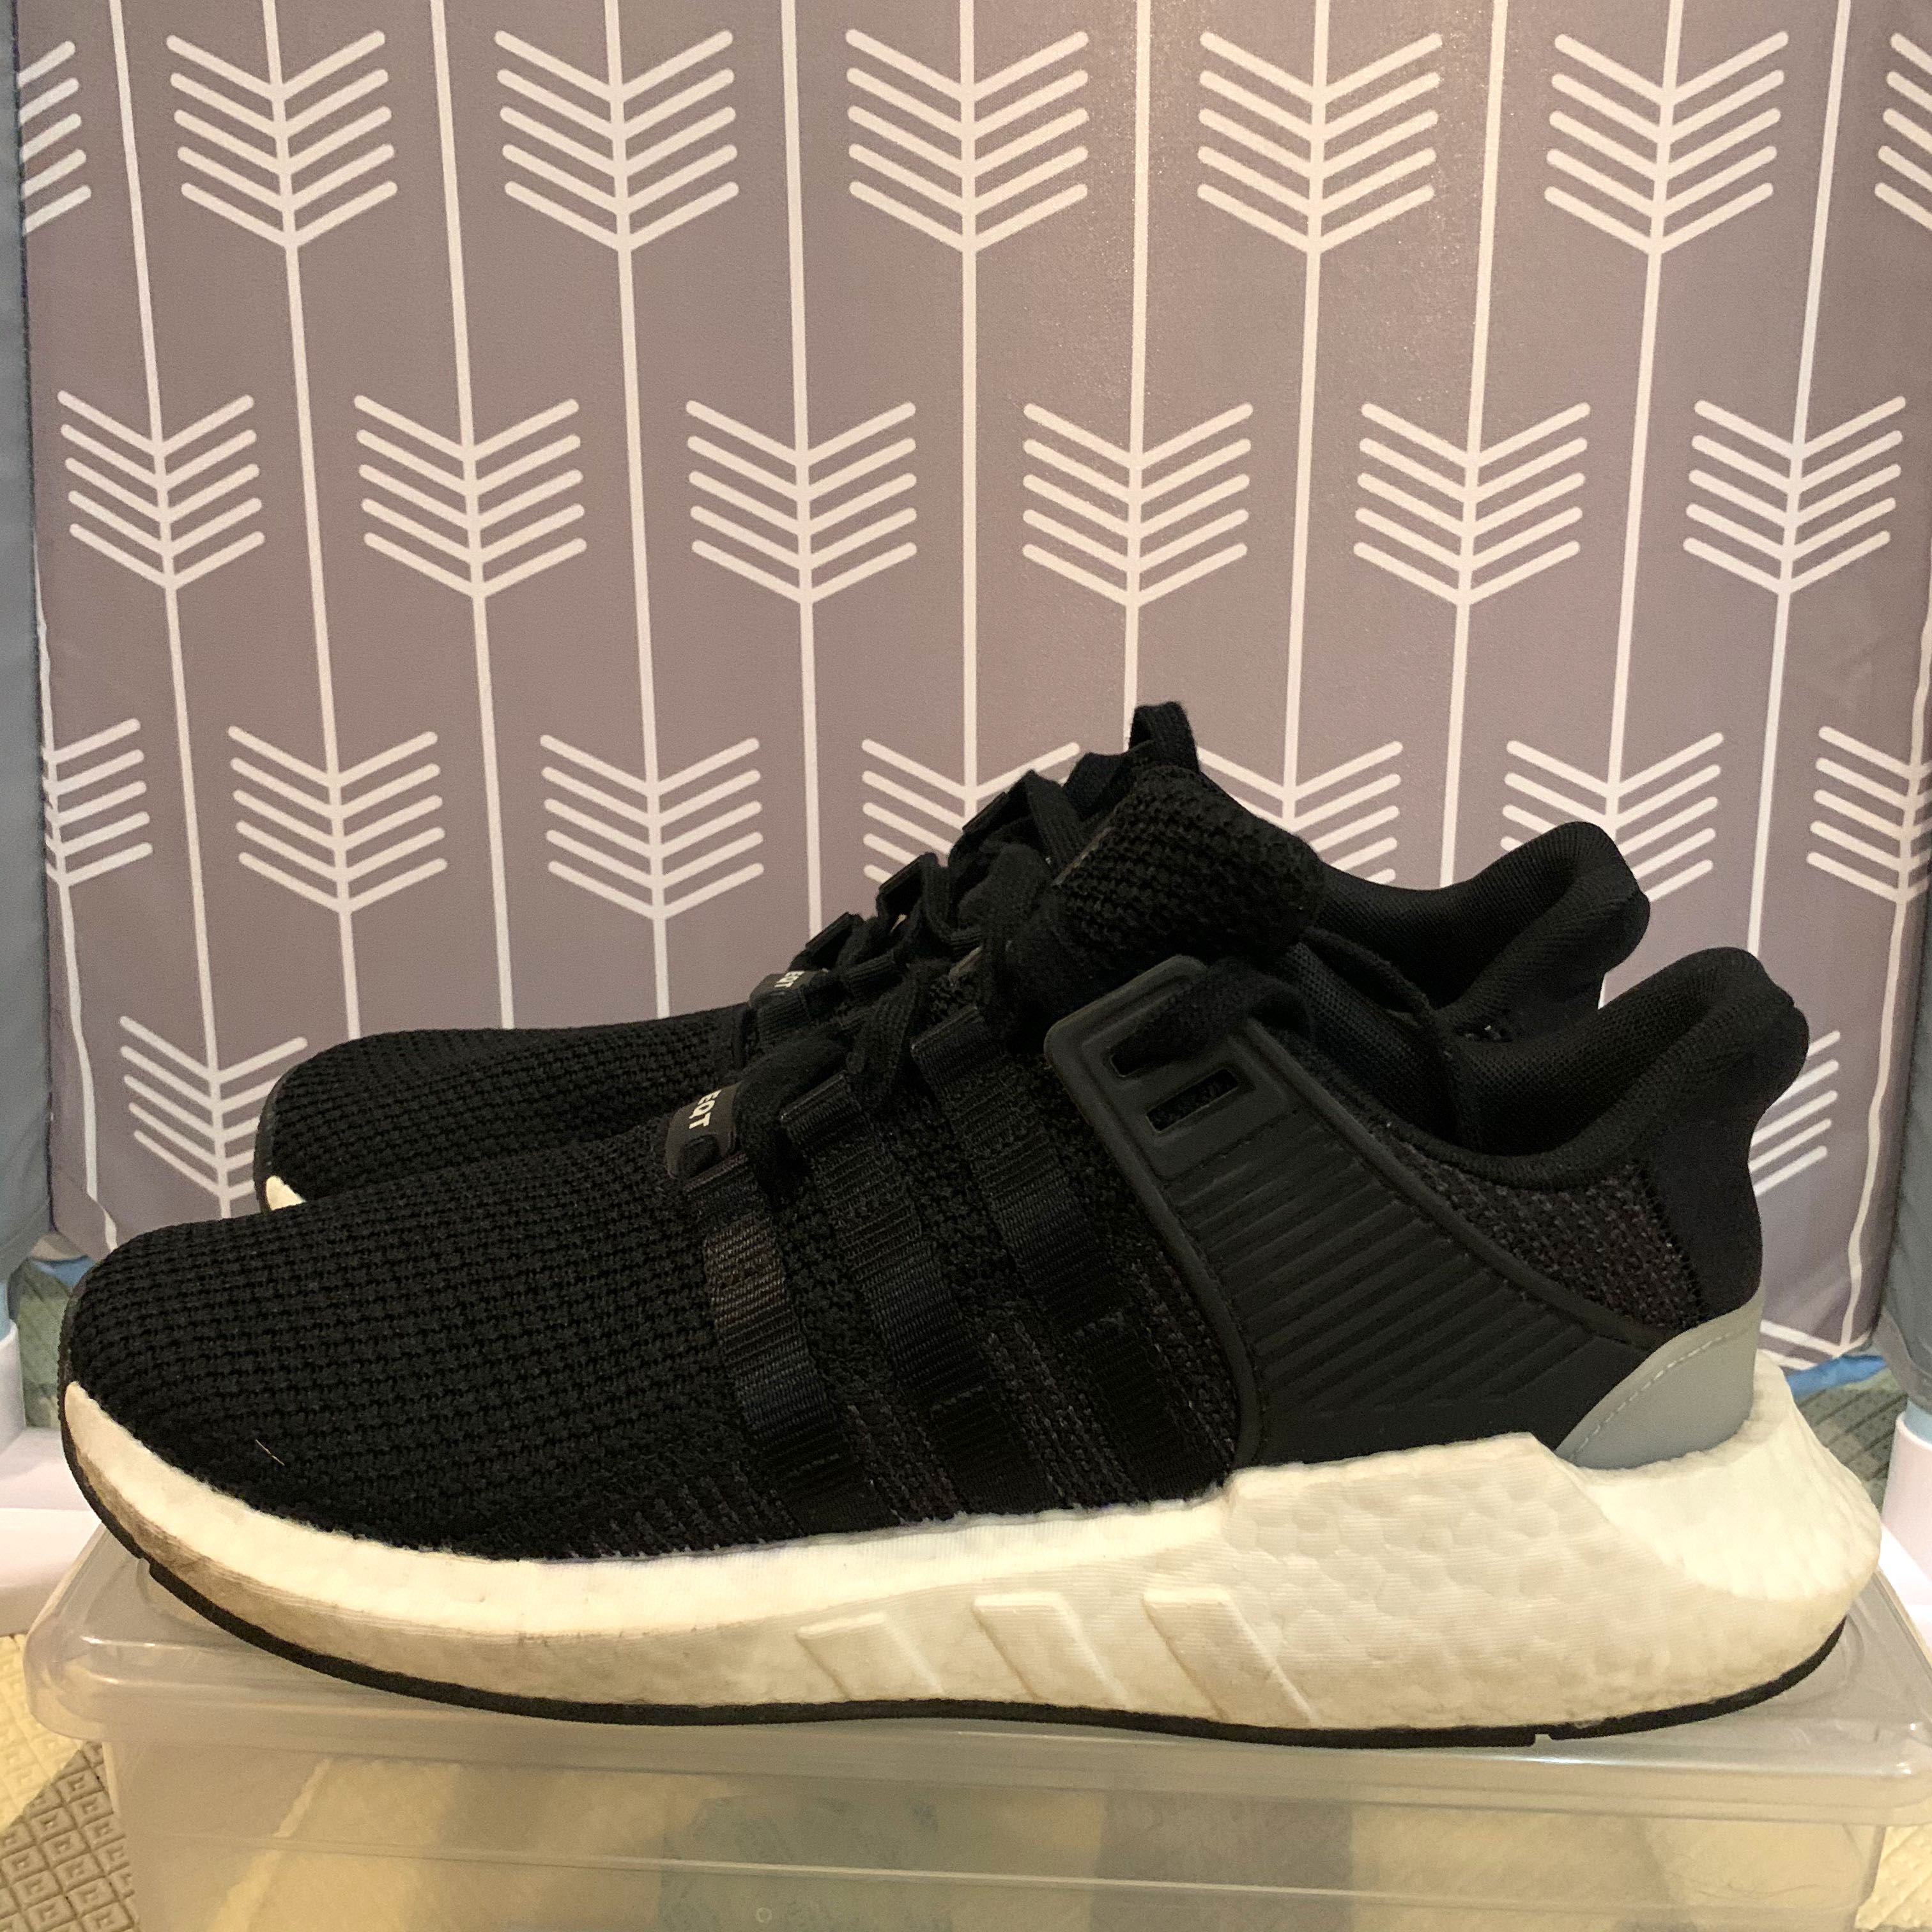 Lágrimas Compositor Exquisito Adidas EQT ADV 91-17 Black Colorway (Sz 9.5), Men's Fashion, Footwear,  Sneakers on Carousell